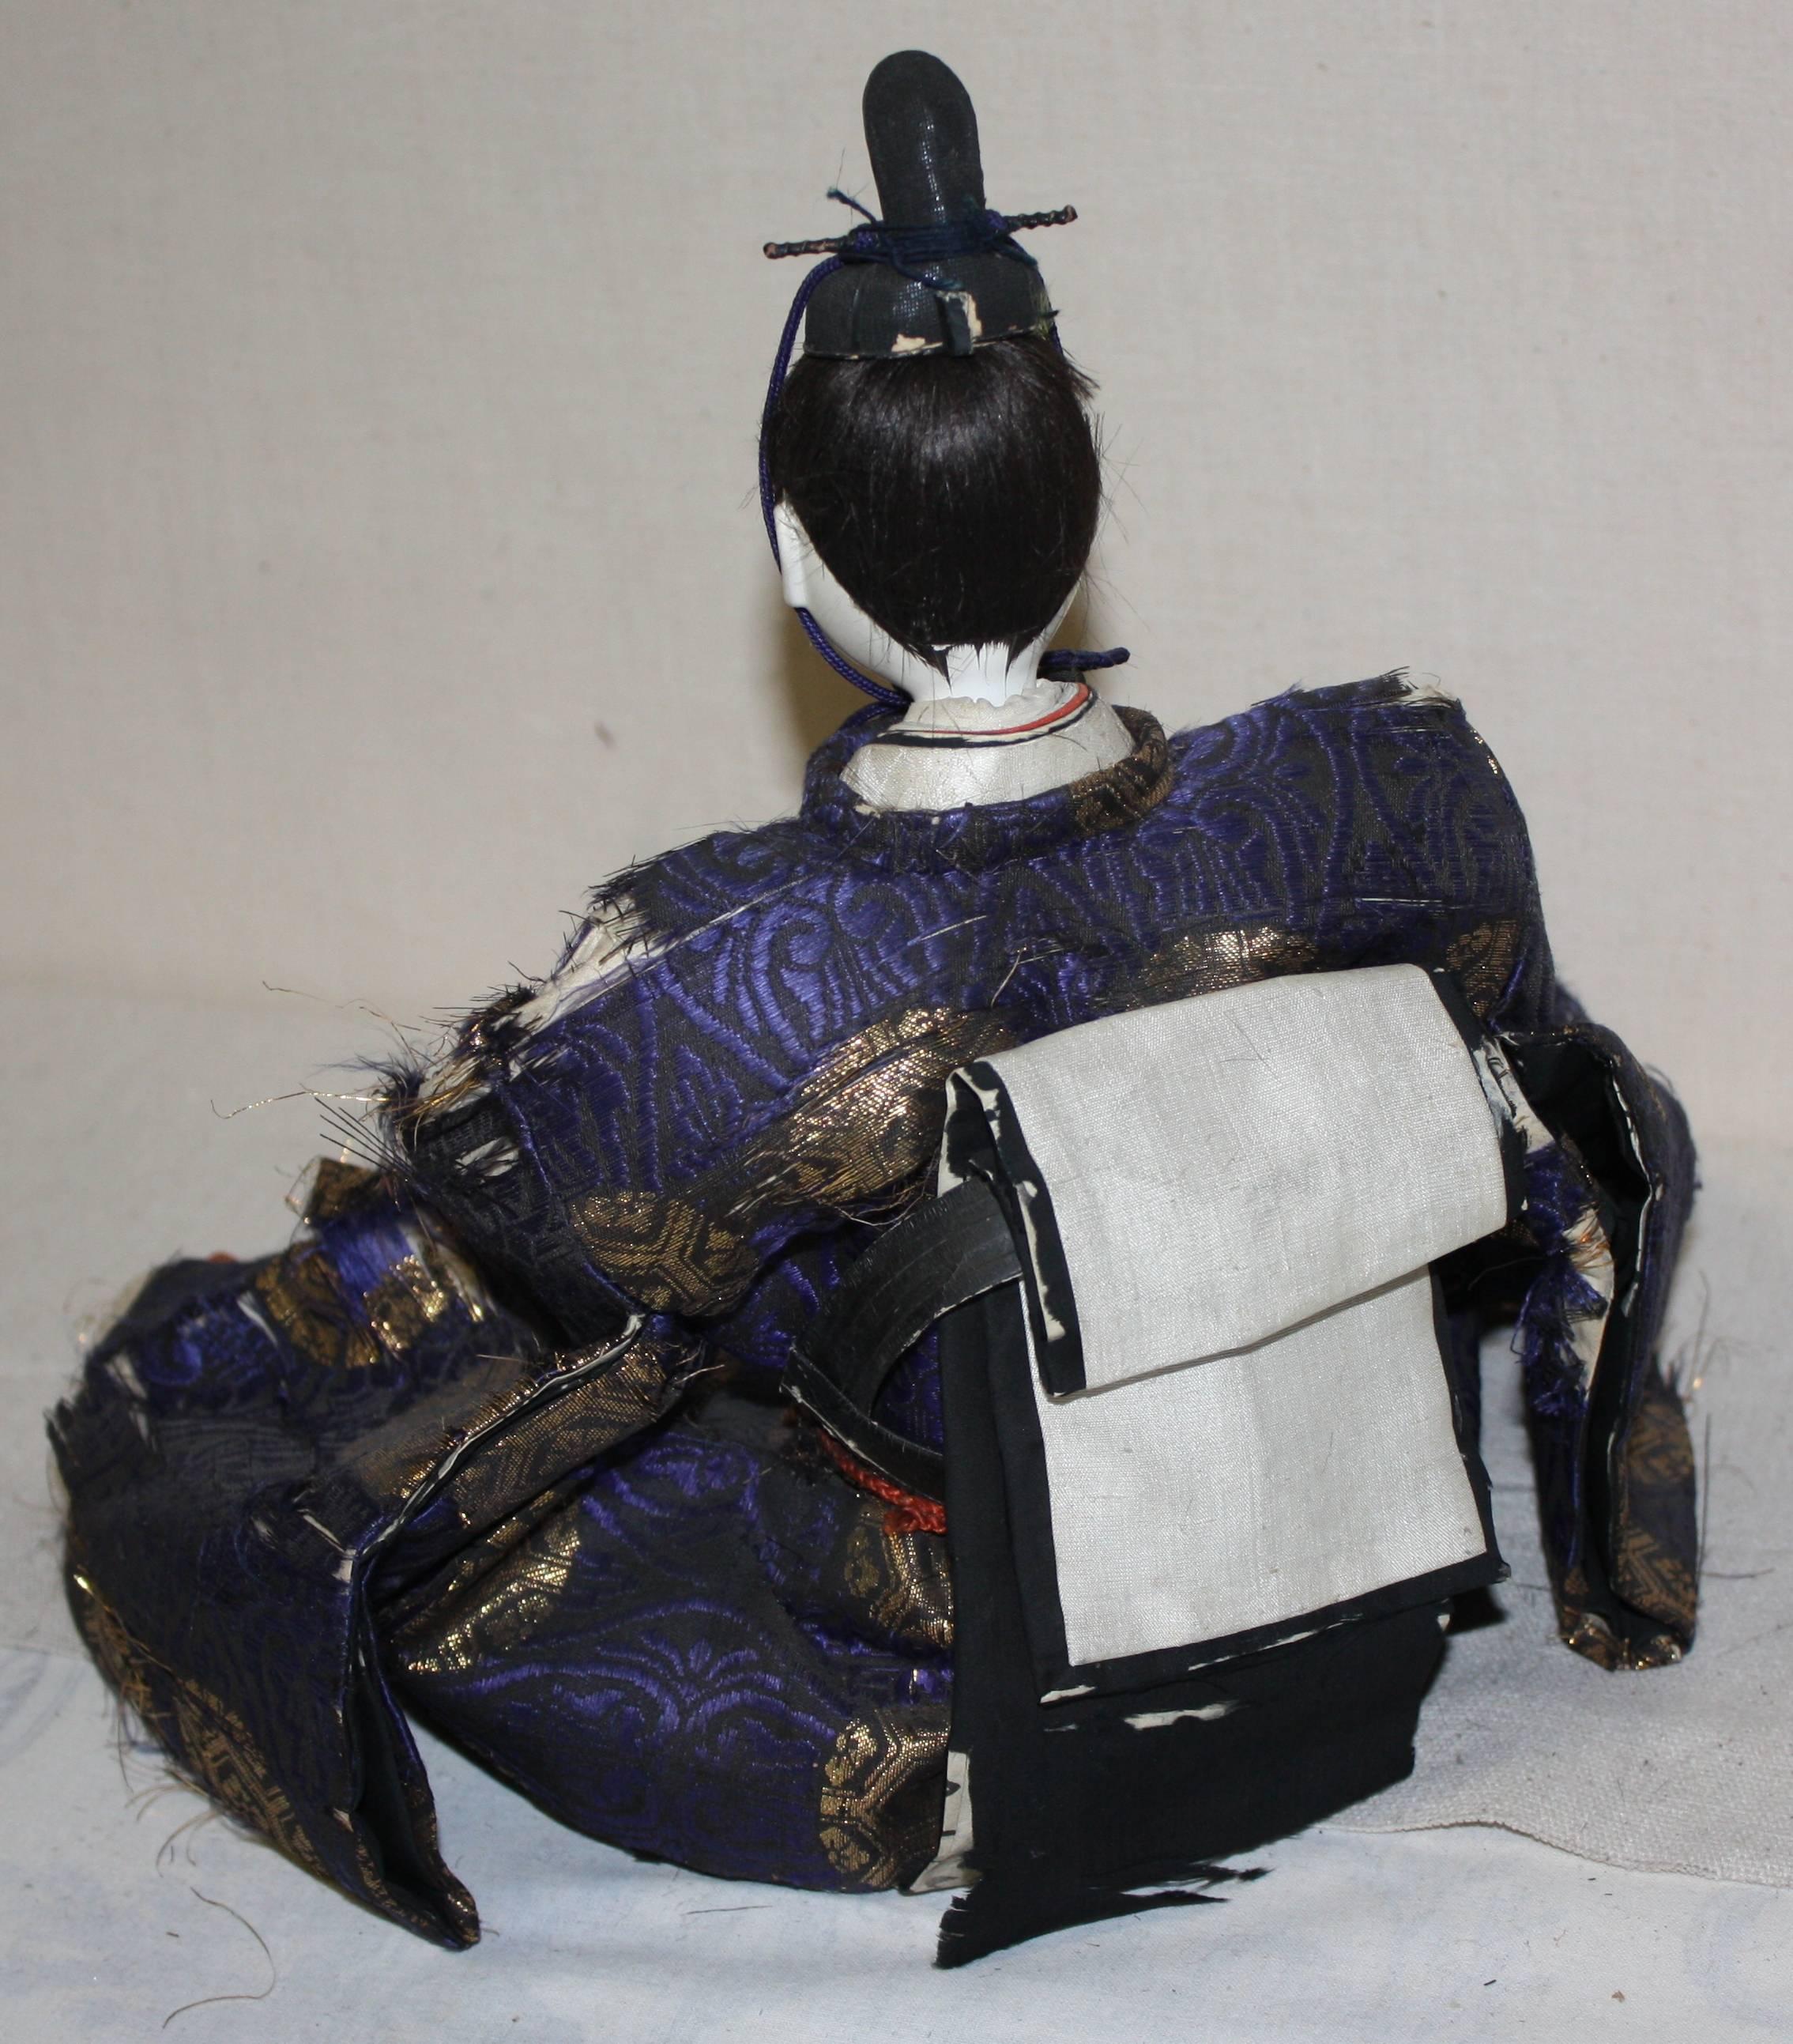 A Japanese Meiji period doll of the Emperor, with porcelain face and hands, glazed in ground oyster shells (Gofun), and wearing period costume.